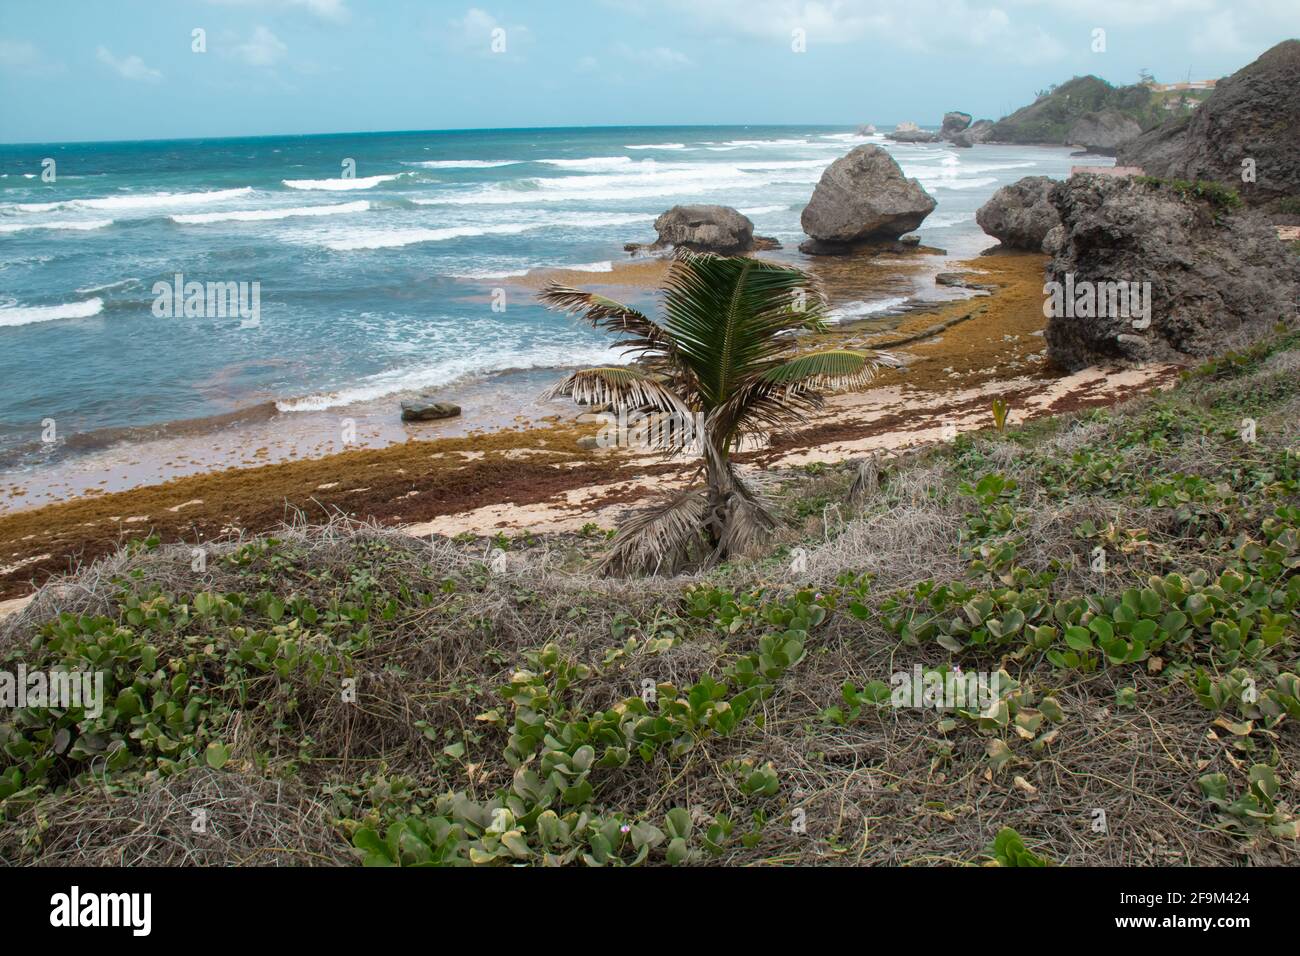 Photo of the road view of Bathsheba beach on the East Coast of Barbados. Strong winds, blowing palm tree, strong breaking waves at low tide. Stock Photo